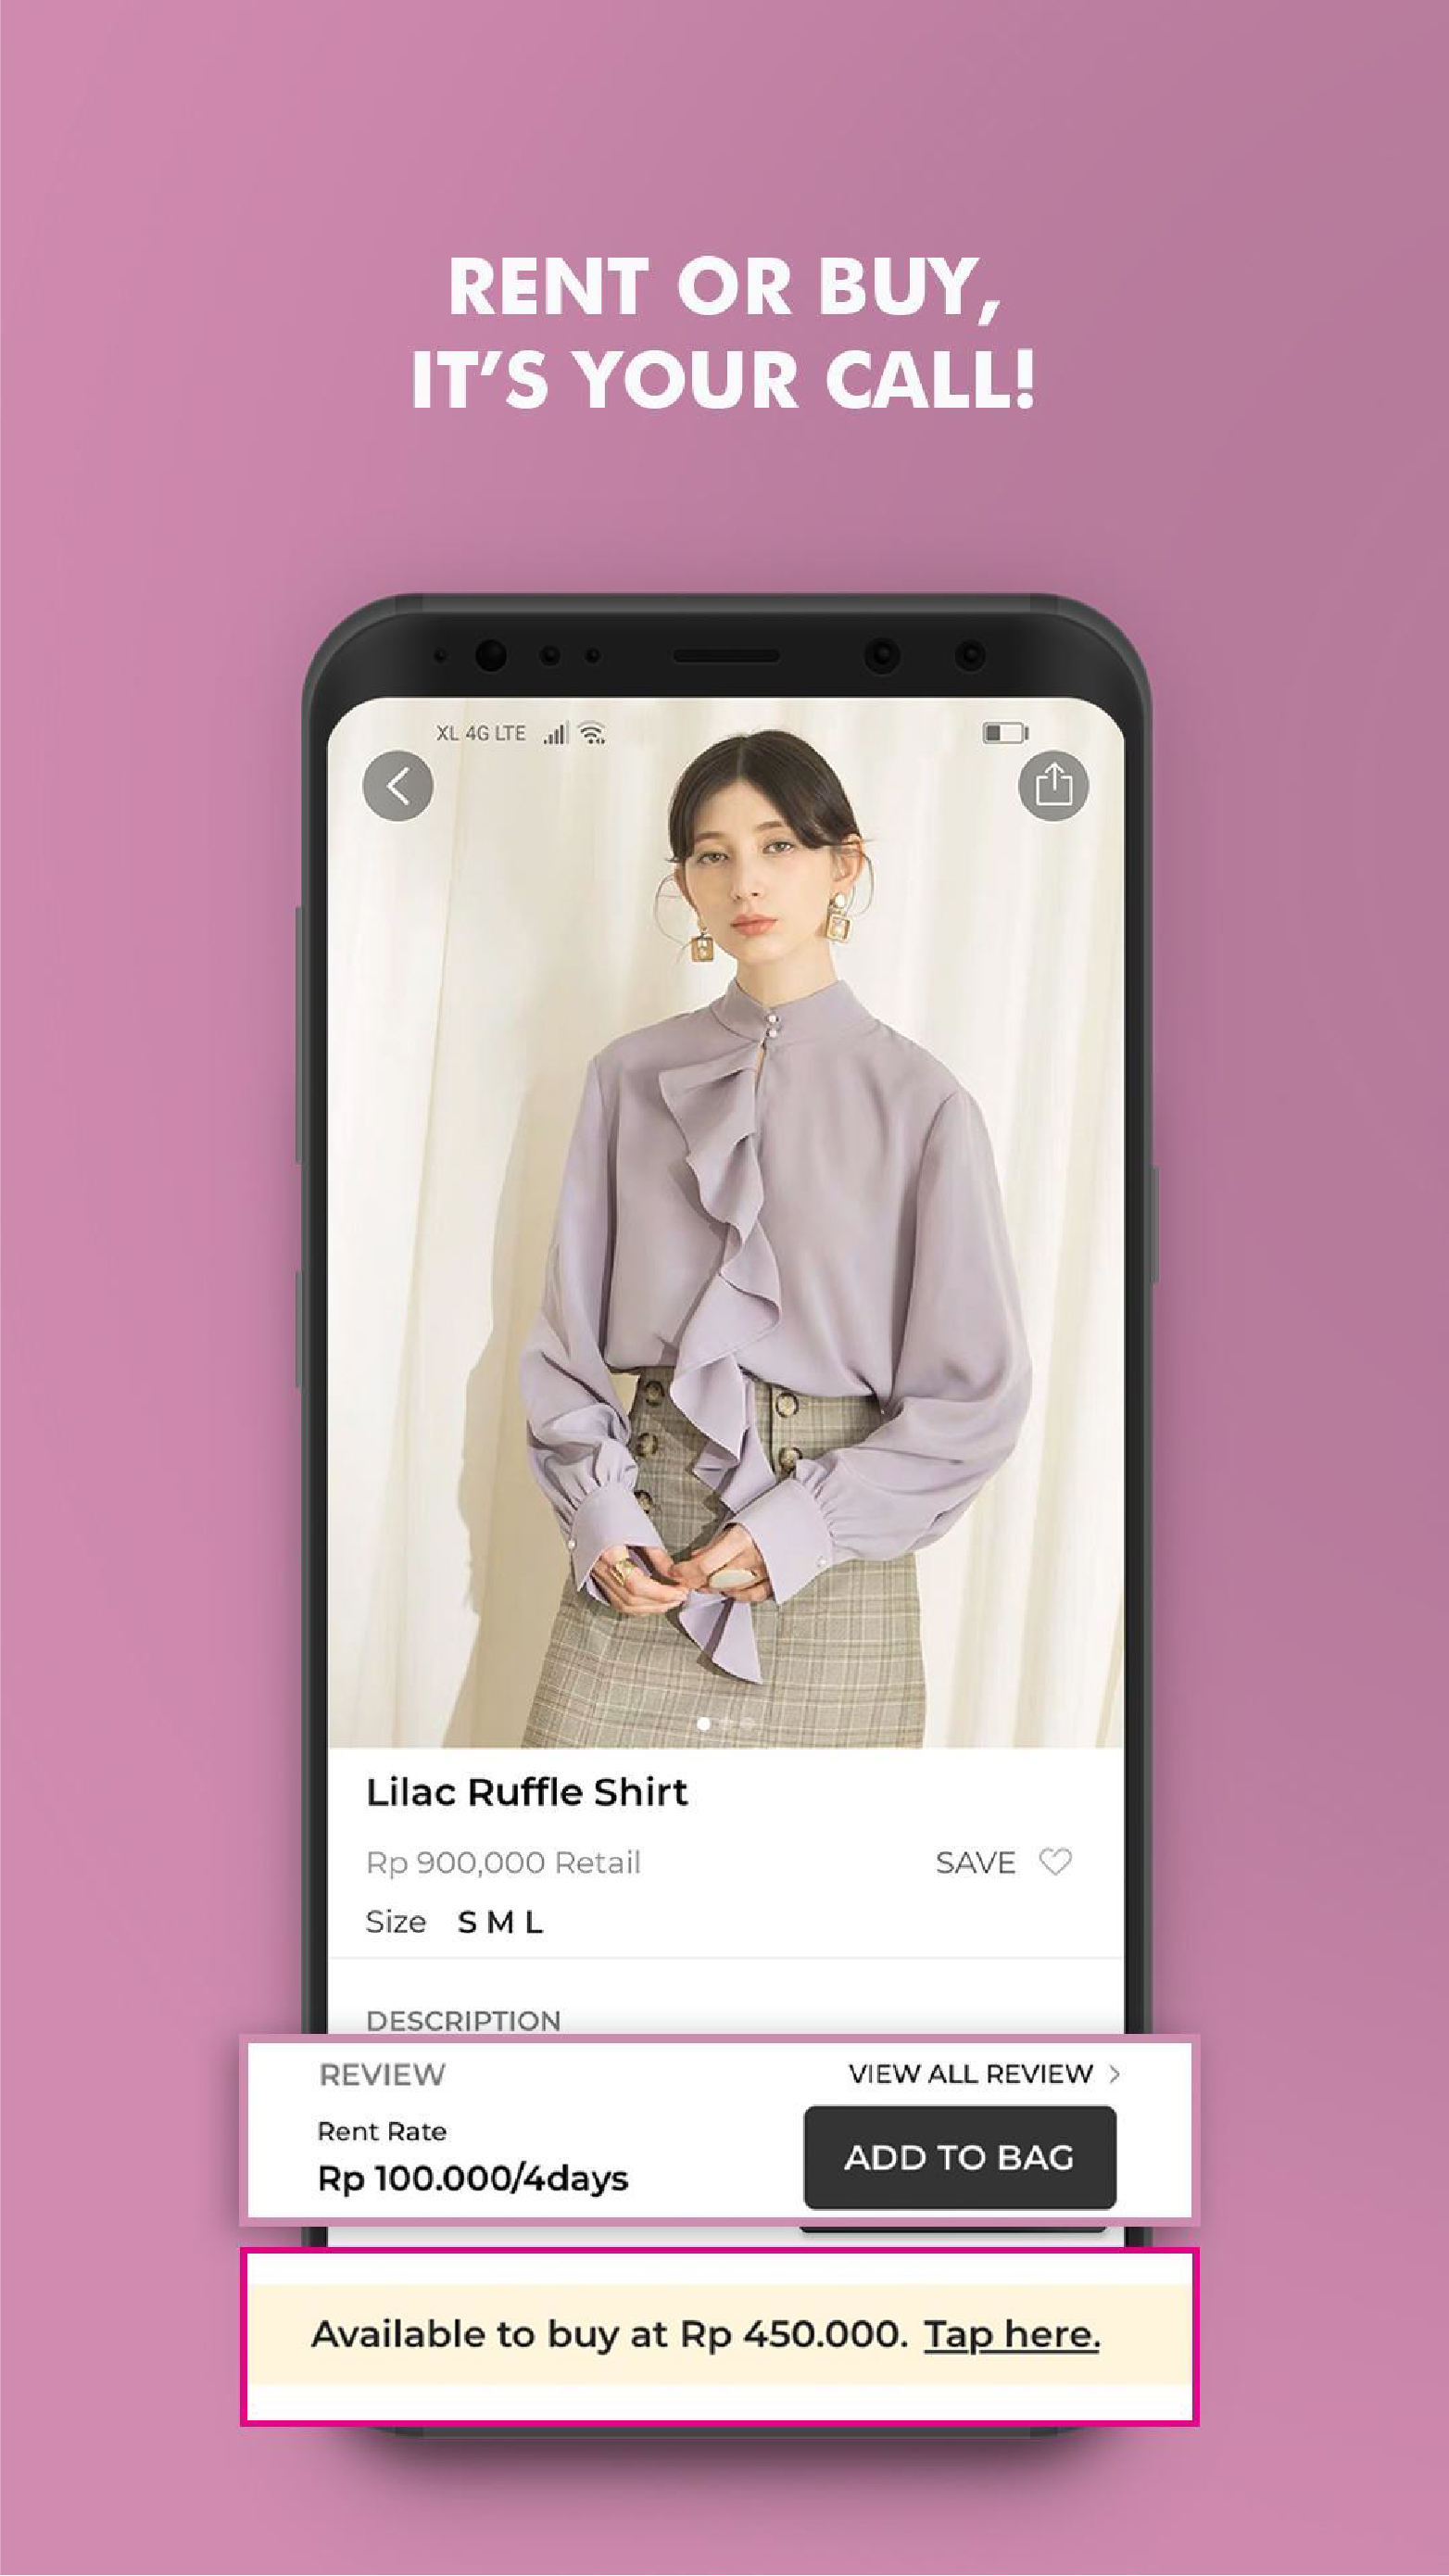 Rentique's New App Brings Retail Freedom, Lets Users Buy or Rent Exquisite Garments at a Fraction of Cost